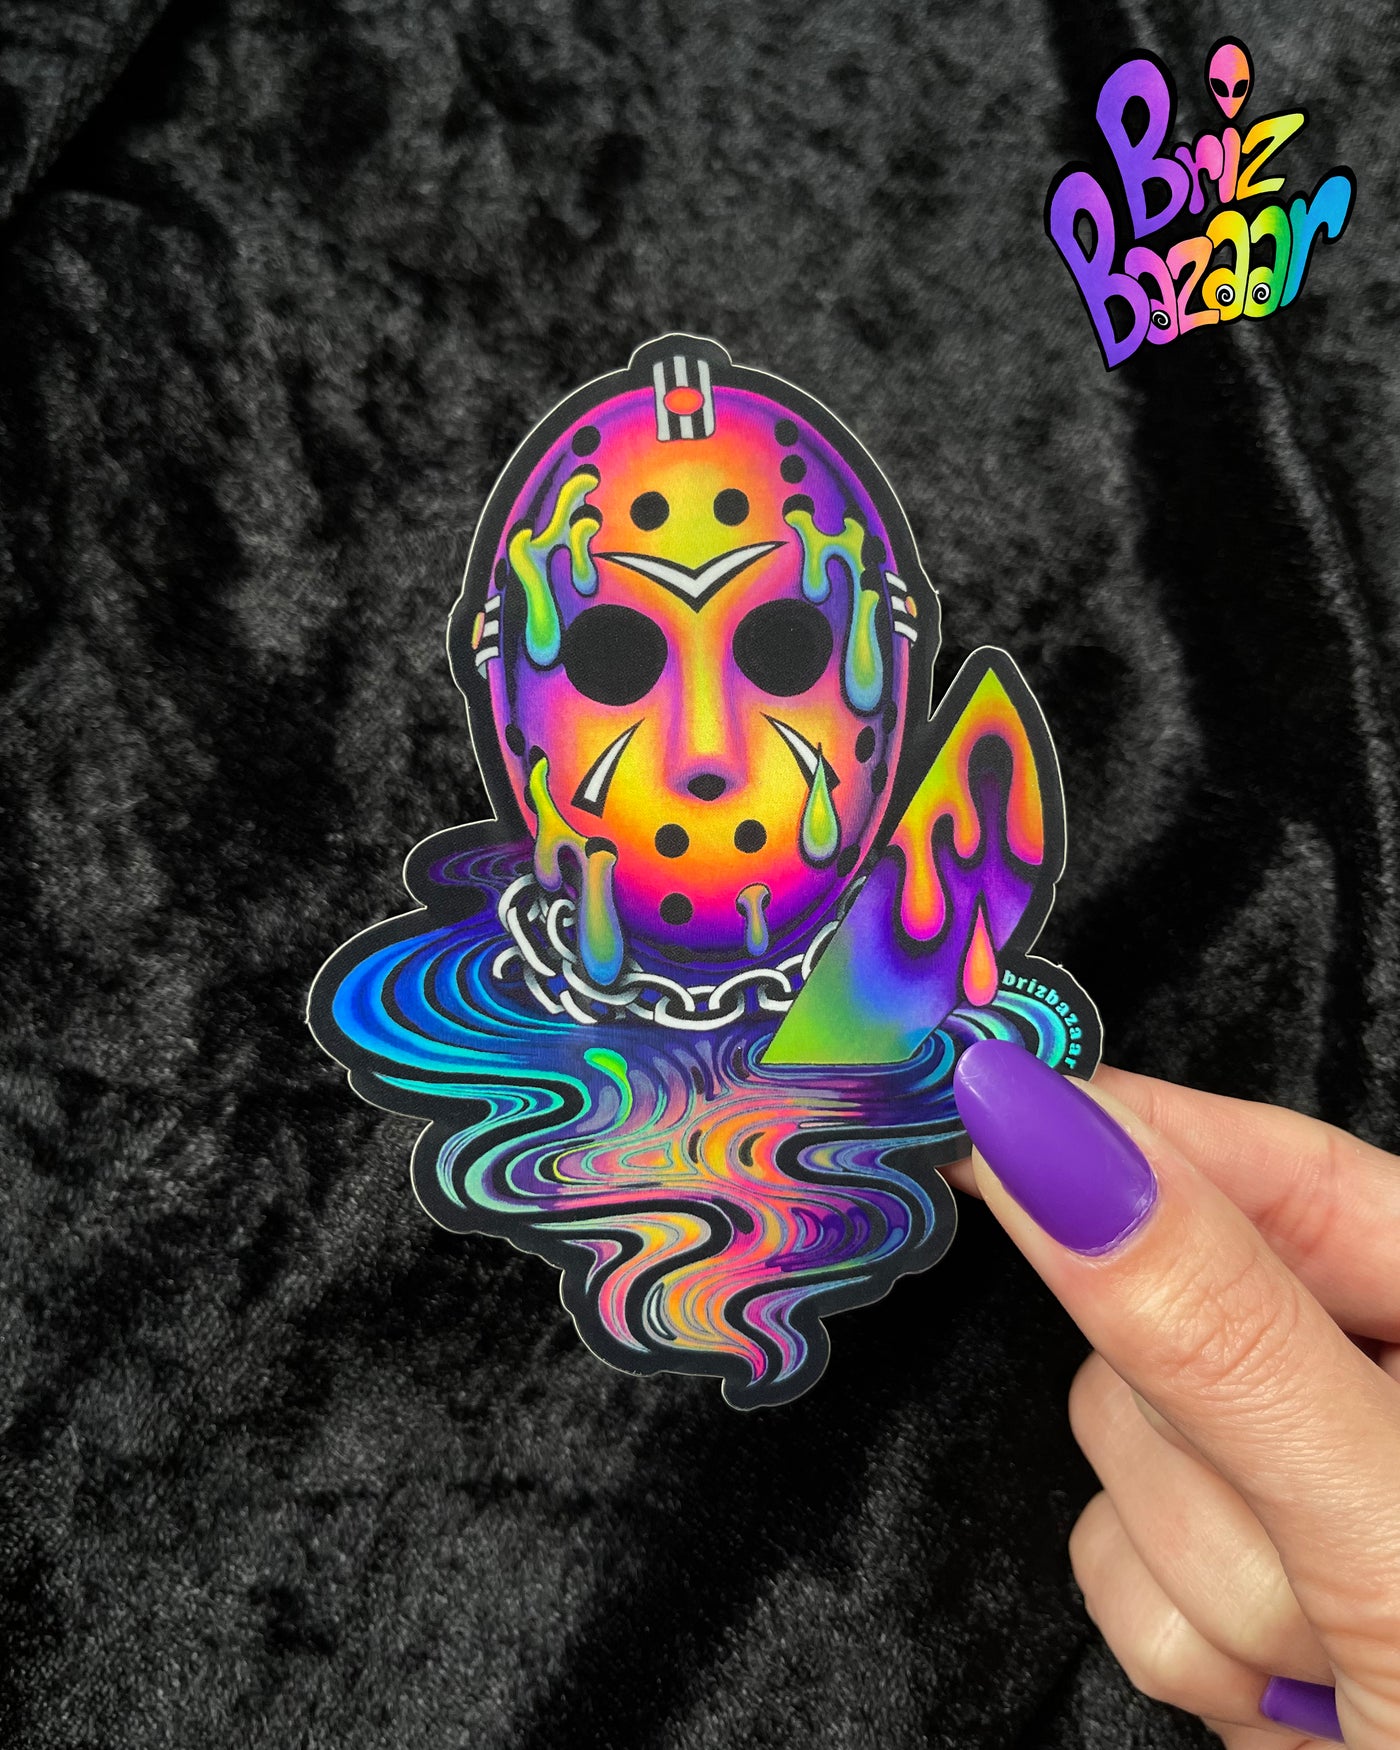 Holographic sticker of PSYDAY